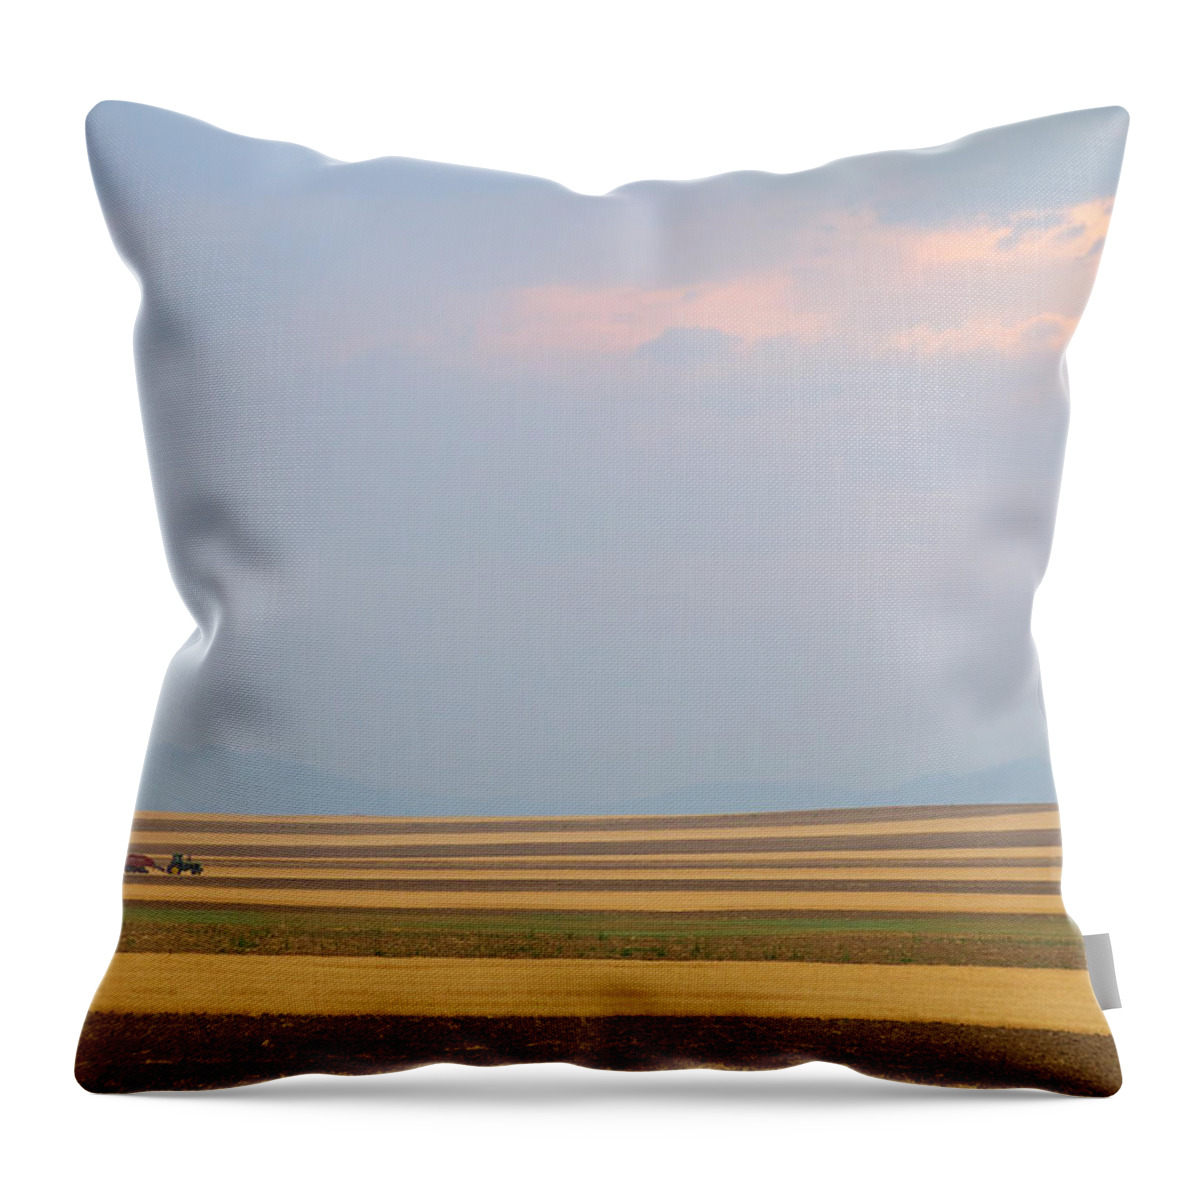 View Throw Pillow featuring the photograph Boulder County Colorado Open Space Country View #3 by James BO Insogna